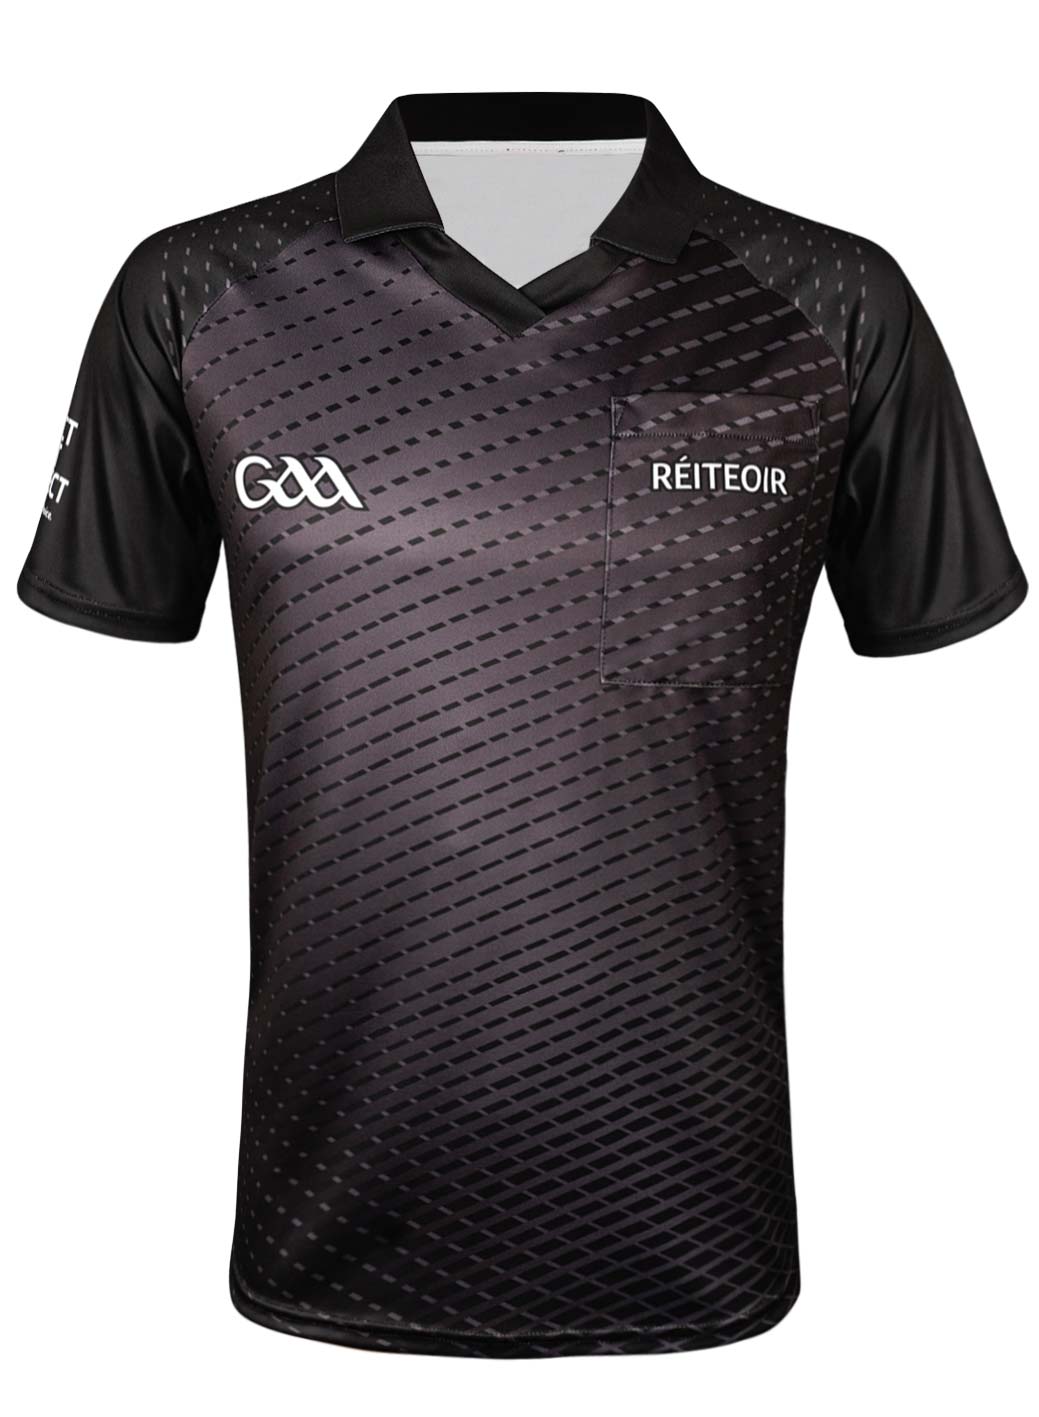 Official GAA Referees Black/Grey Jersey Regular Fit Adult